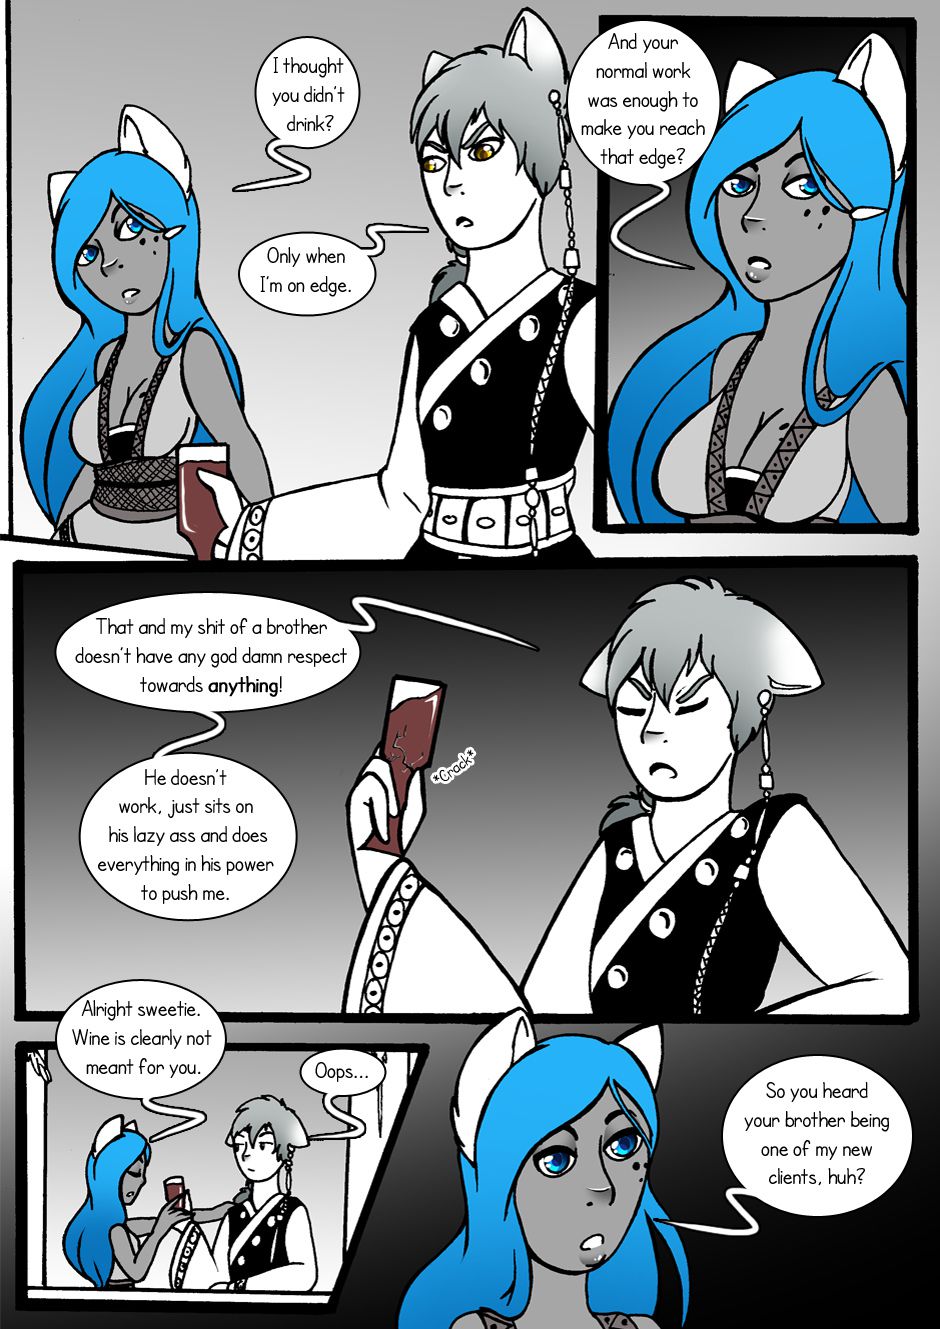 [Jeny-jen94] Between Kings and Queens [Ongoing] 54